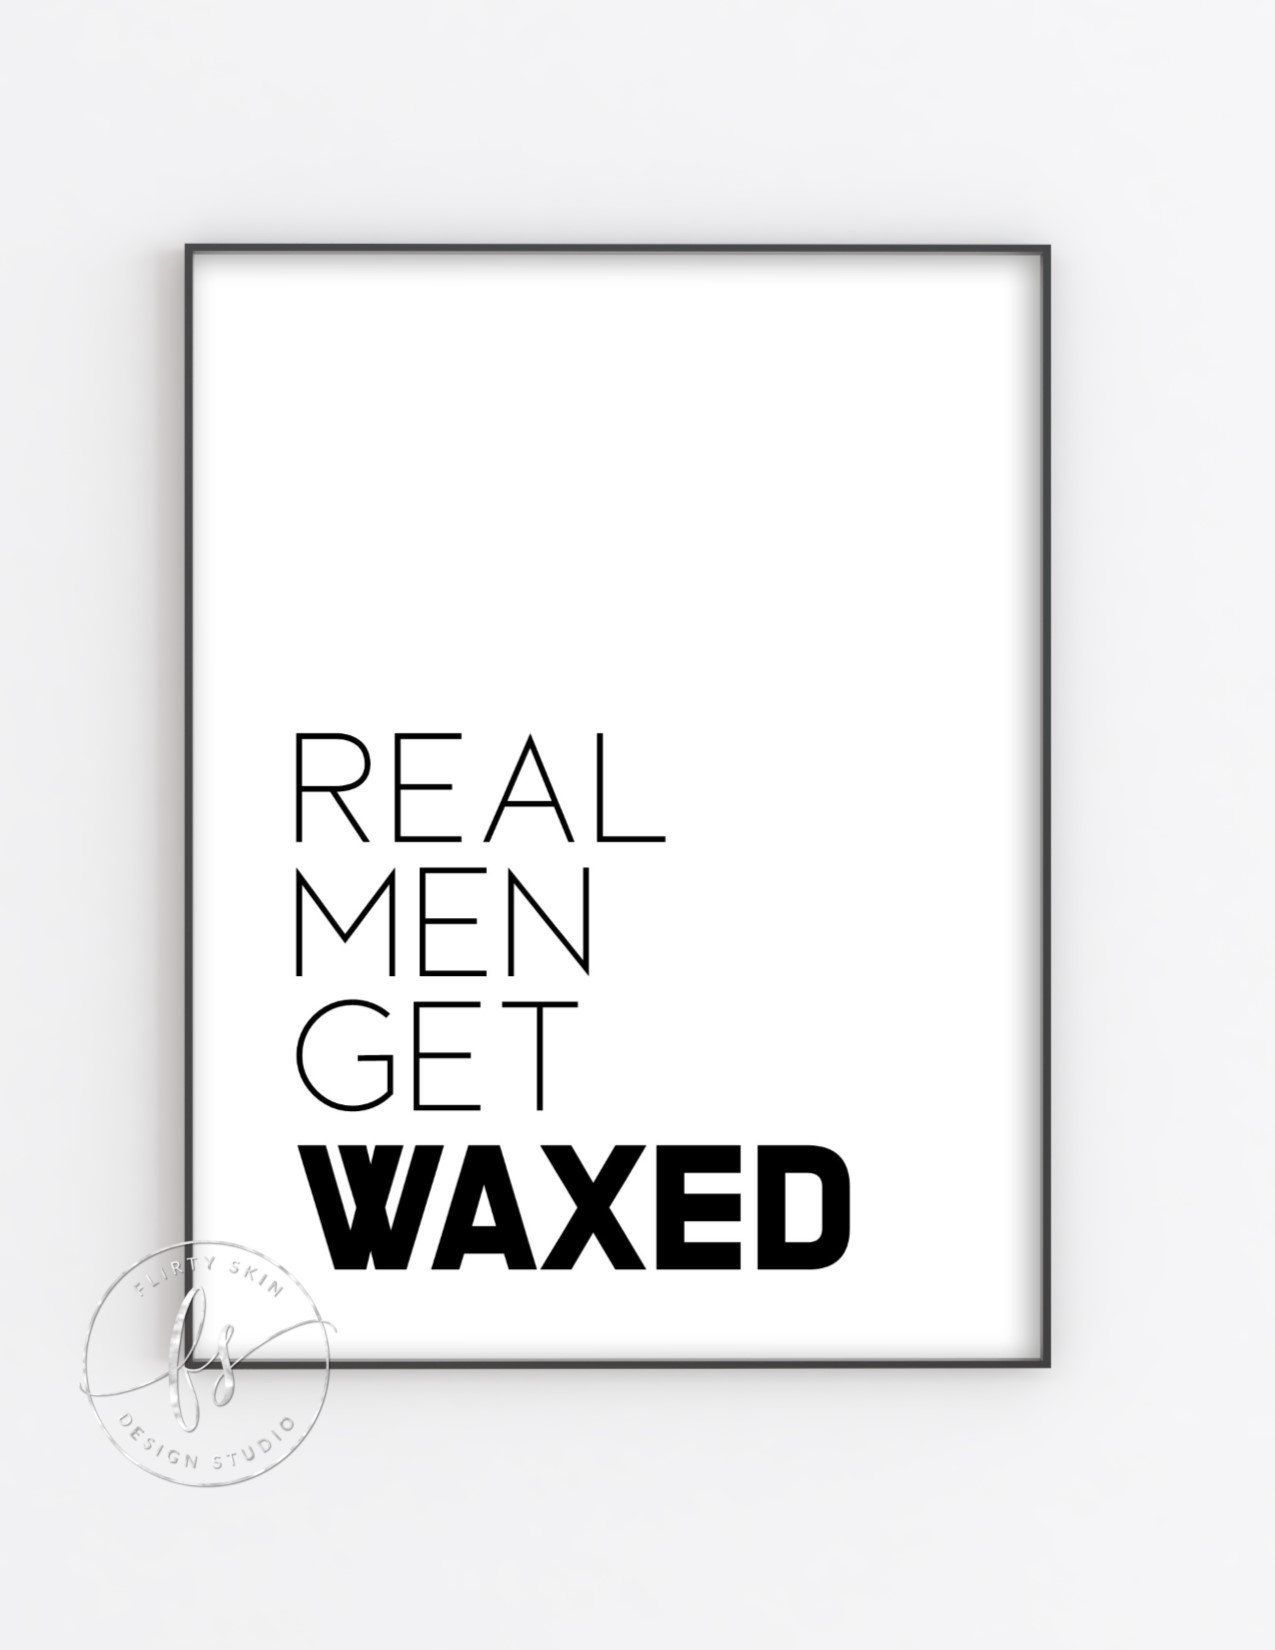 Real Men Get Waxed | Spa Decor | Spa Quote | Esthetician Decor | Beauty Quote | Spa | Salon | Spa Decor | Esthetician | Facials | Waxing - Real Men Get Waxed | Spa Decor | Spa Quote | Esthetician Decor | Beauty Quote | Spa | Salon | Spa Decor | Esthetician | Facials | Waxing -   16 beauty Therapy design ideas